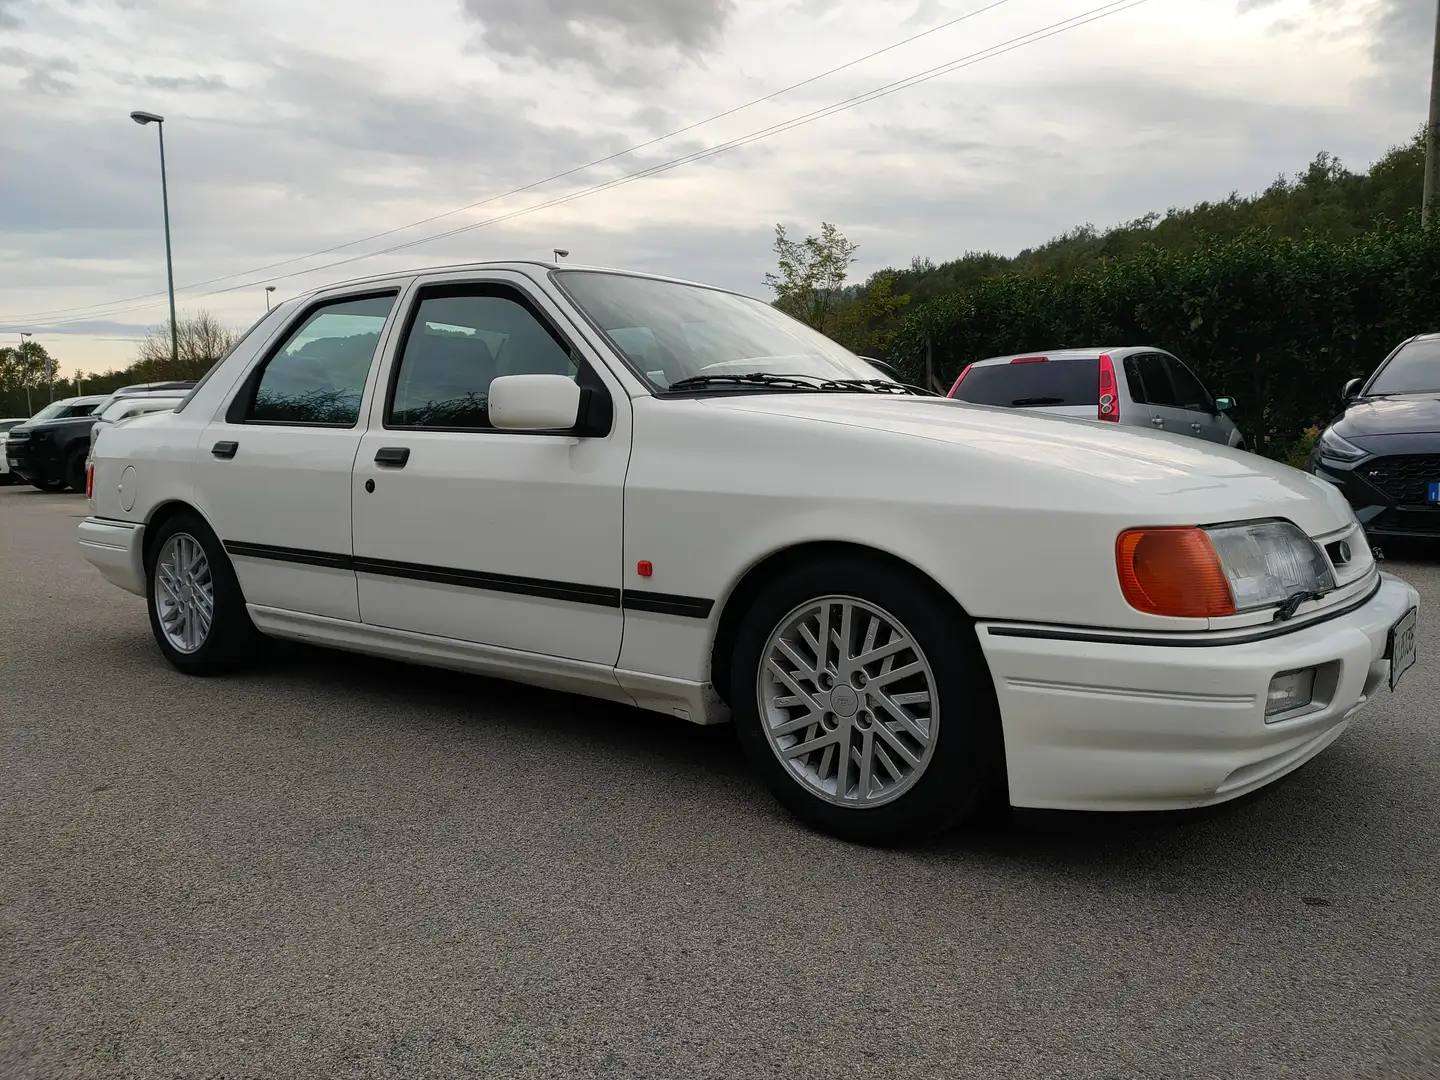 Ford Sierra 2.0 Cosworth 2wd White - 2